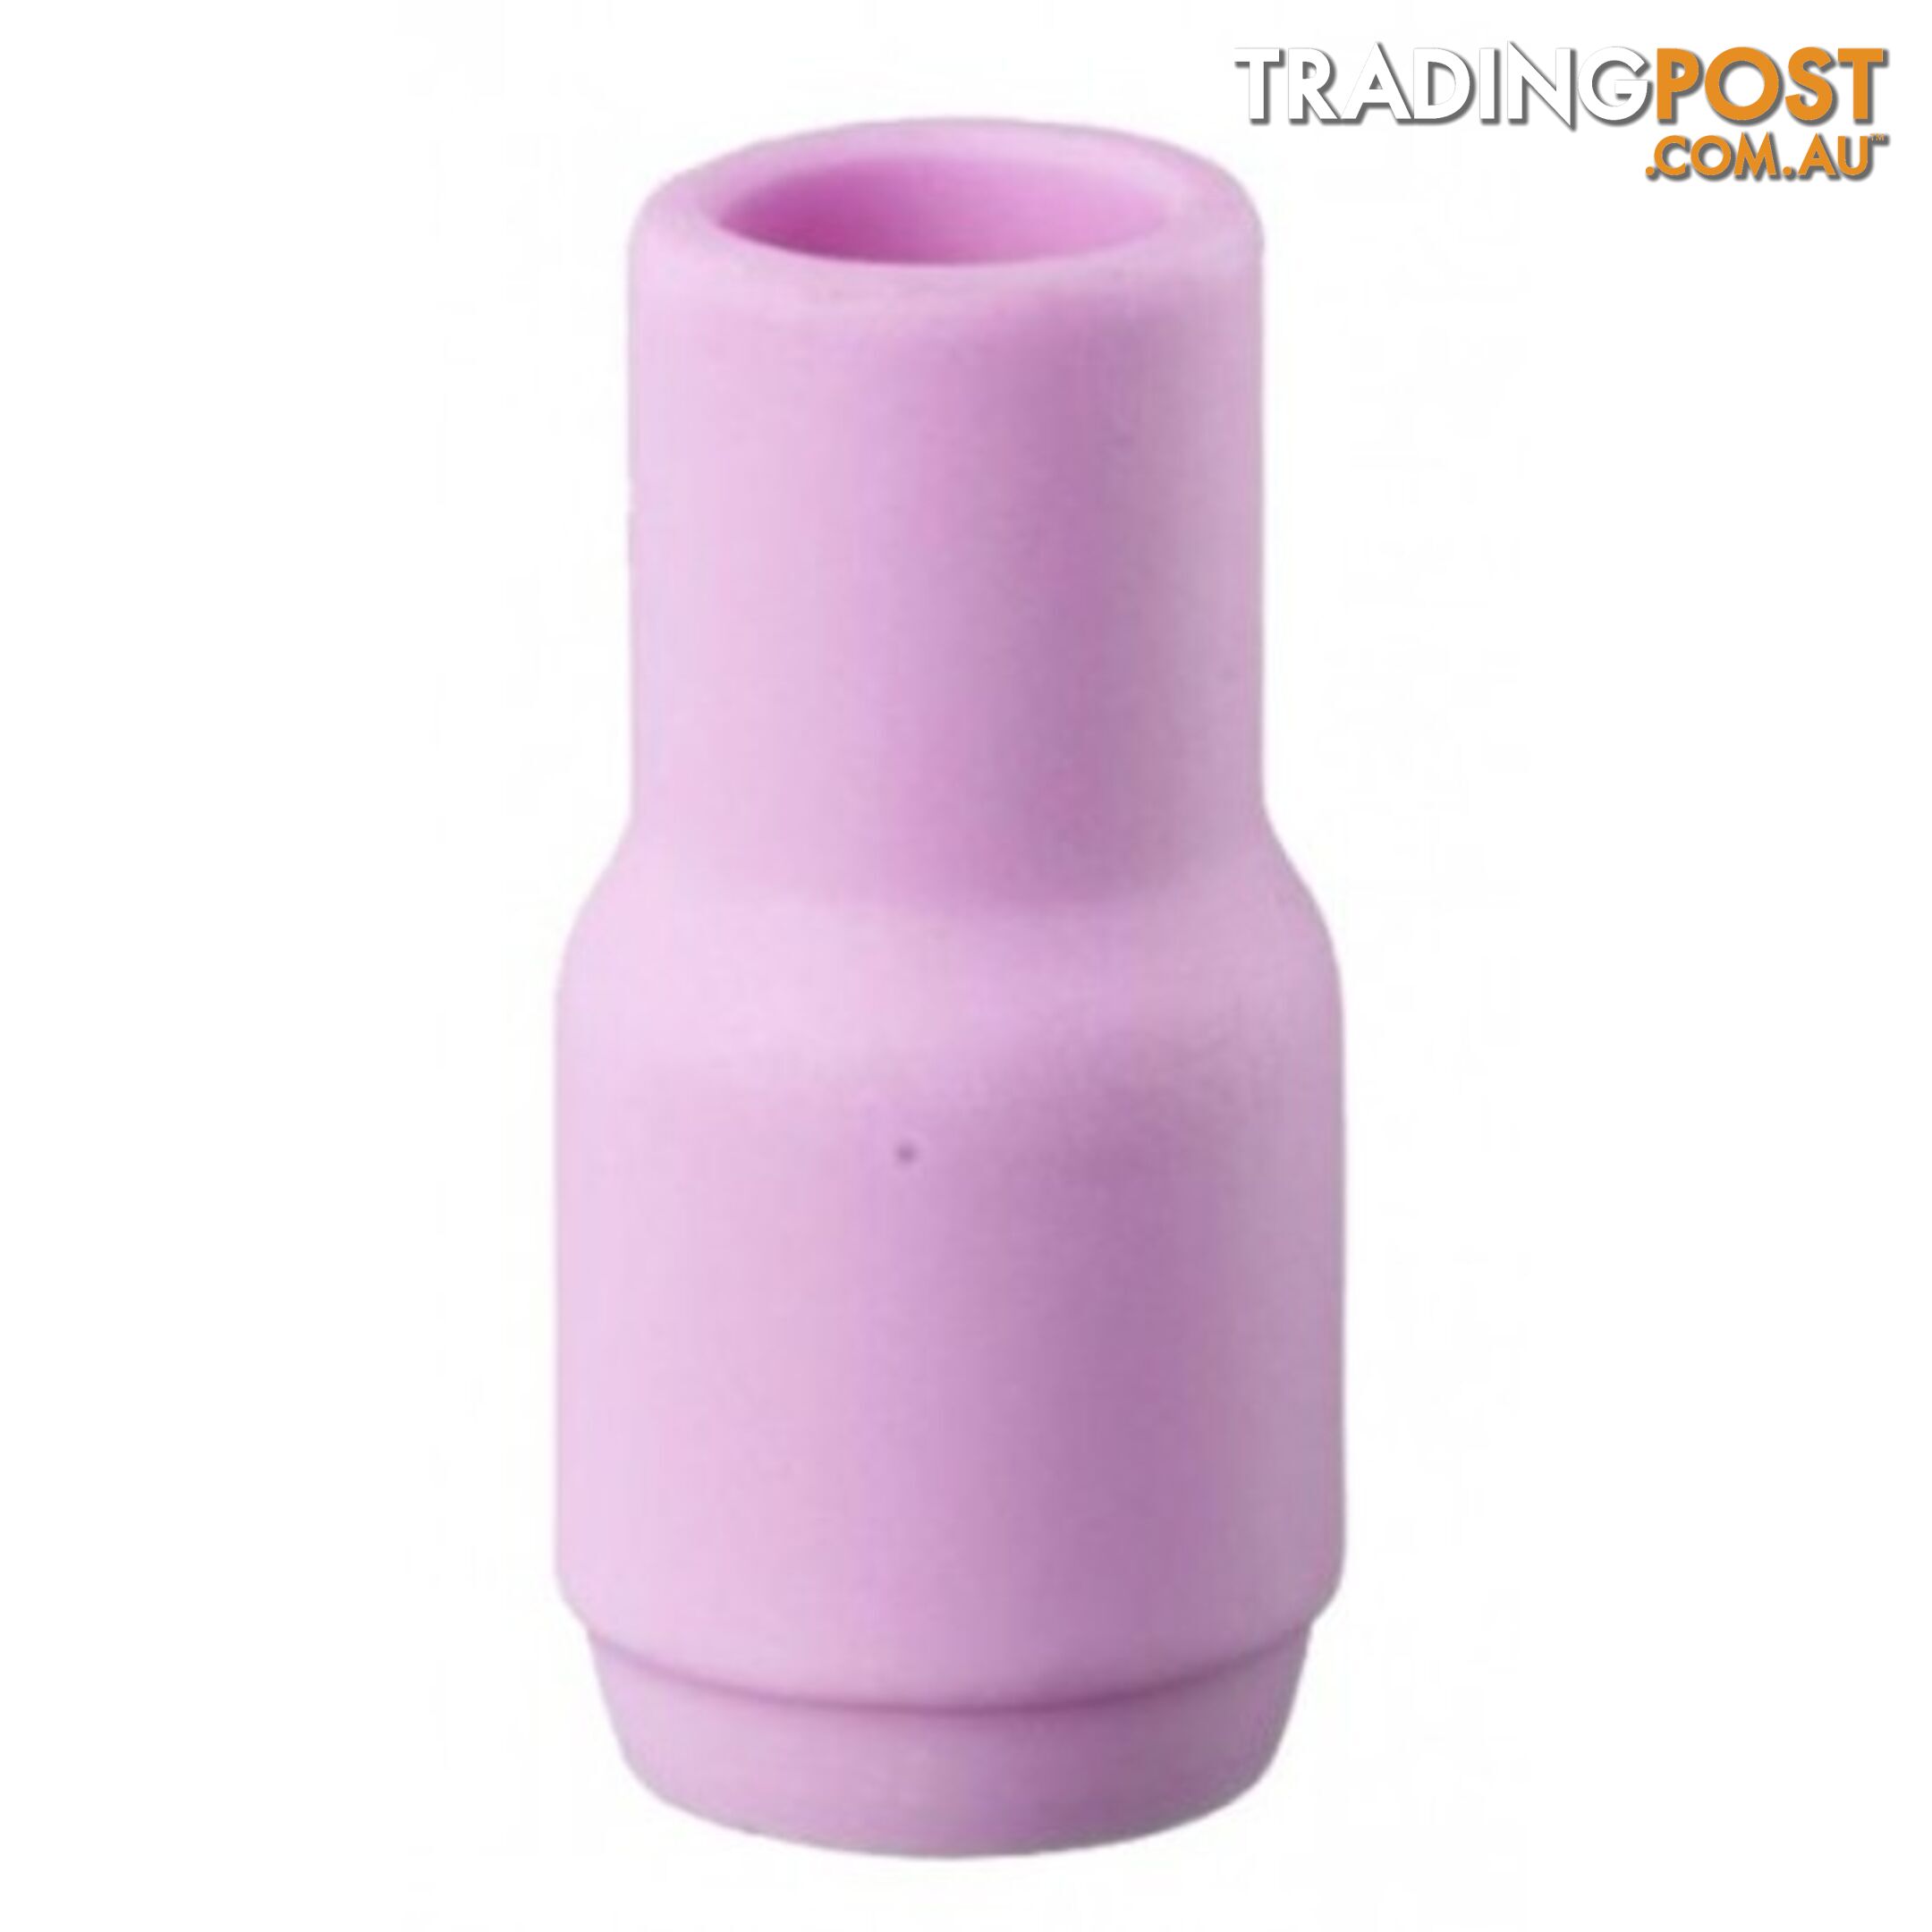 Ceramic Alumina Cup For Collet Body Size 5 (8.0mm) Suits 9/20 Torch 13N09 Pkt : 5